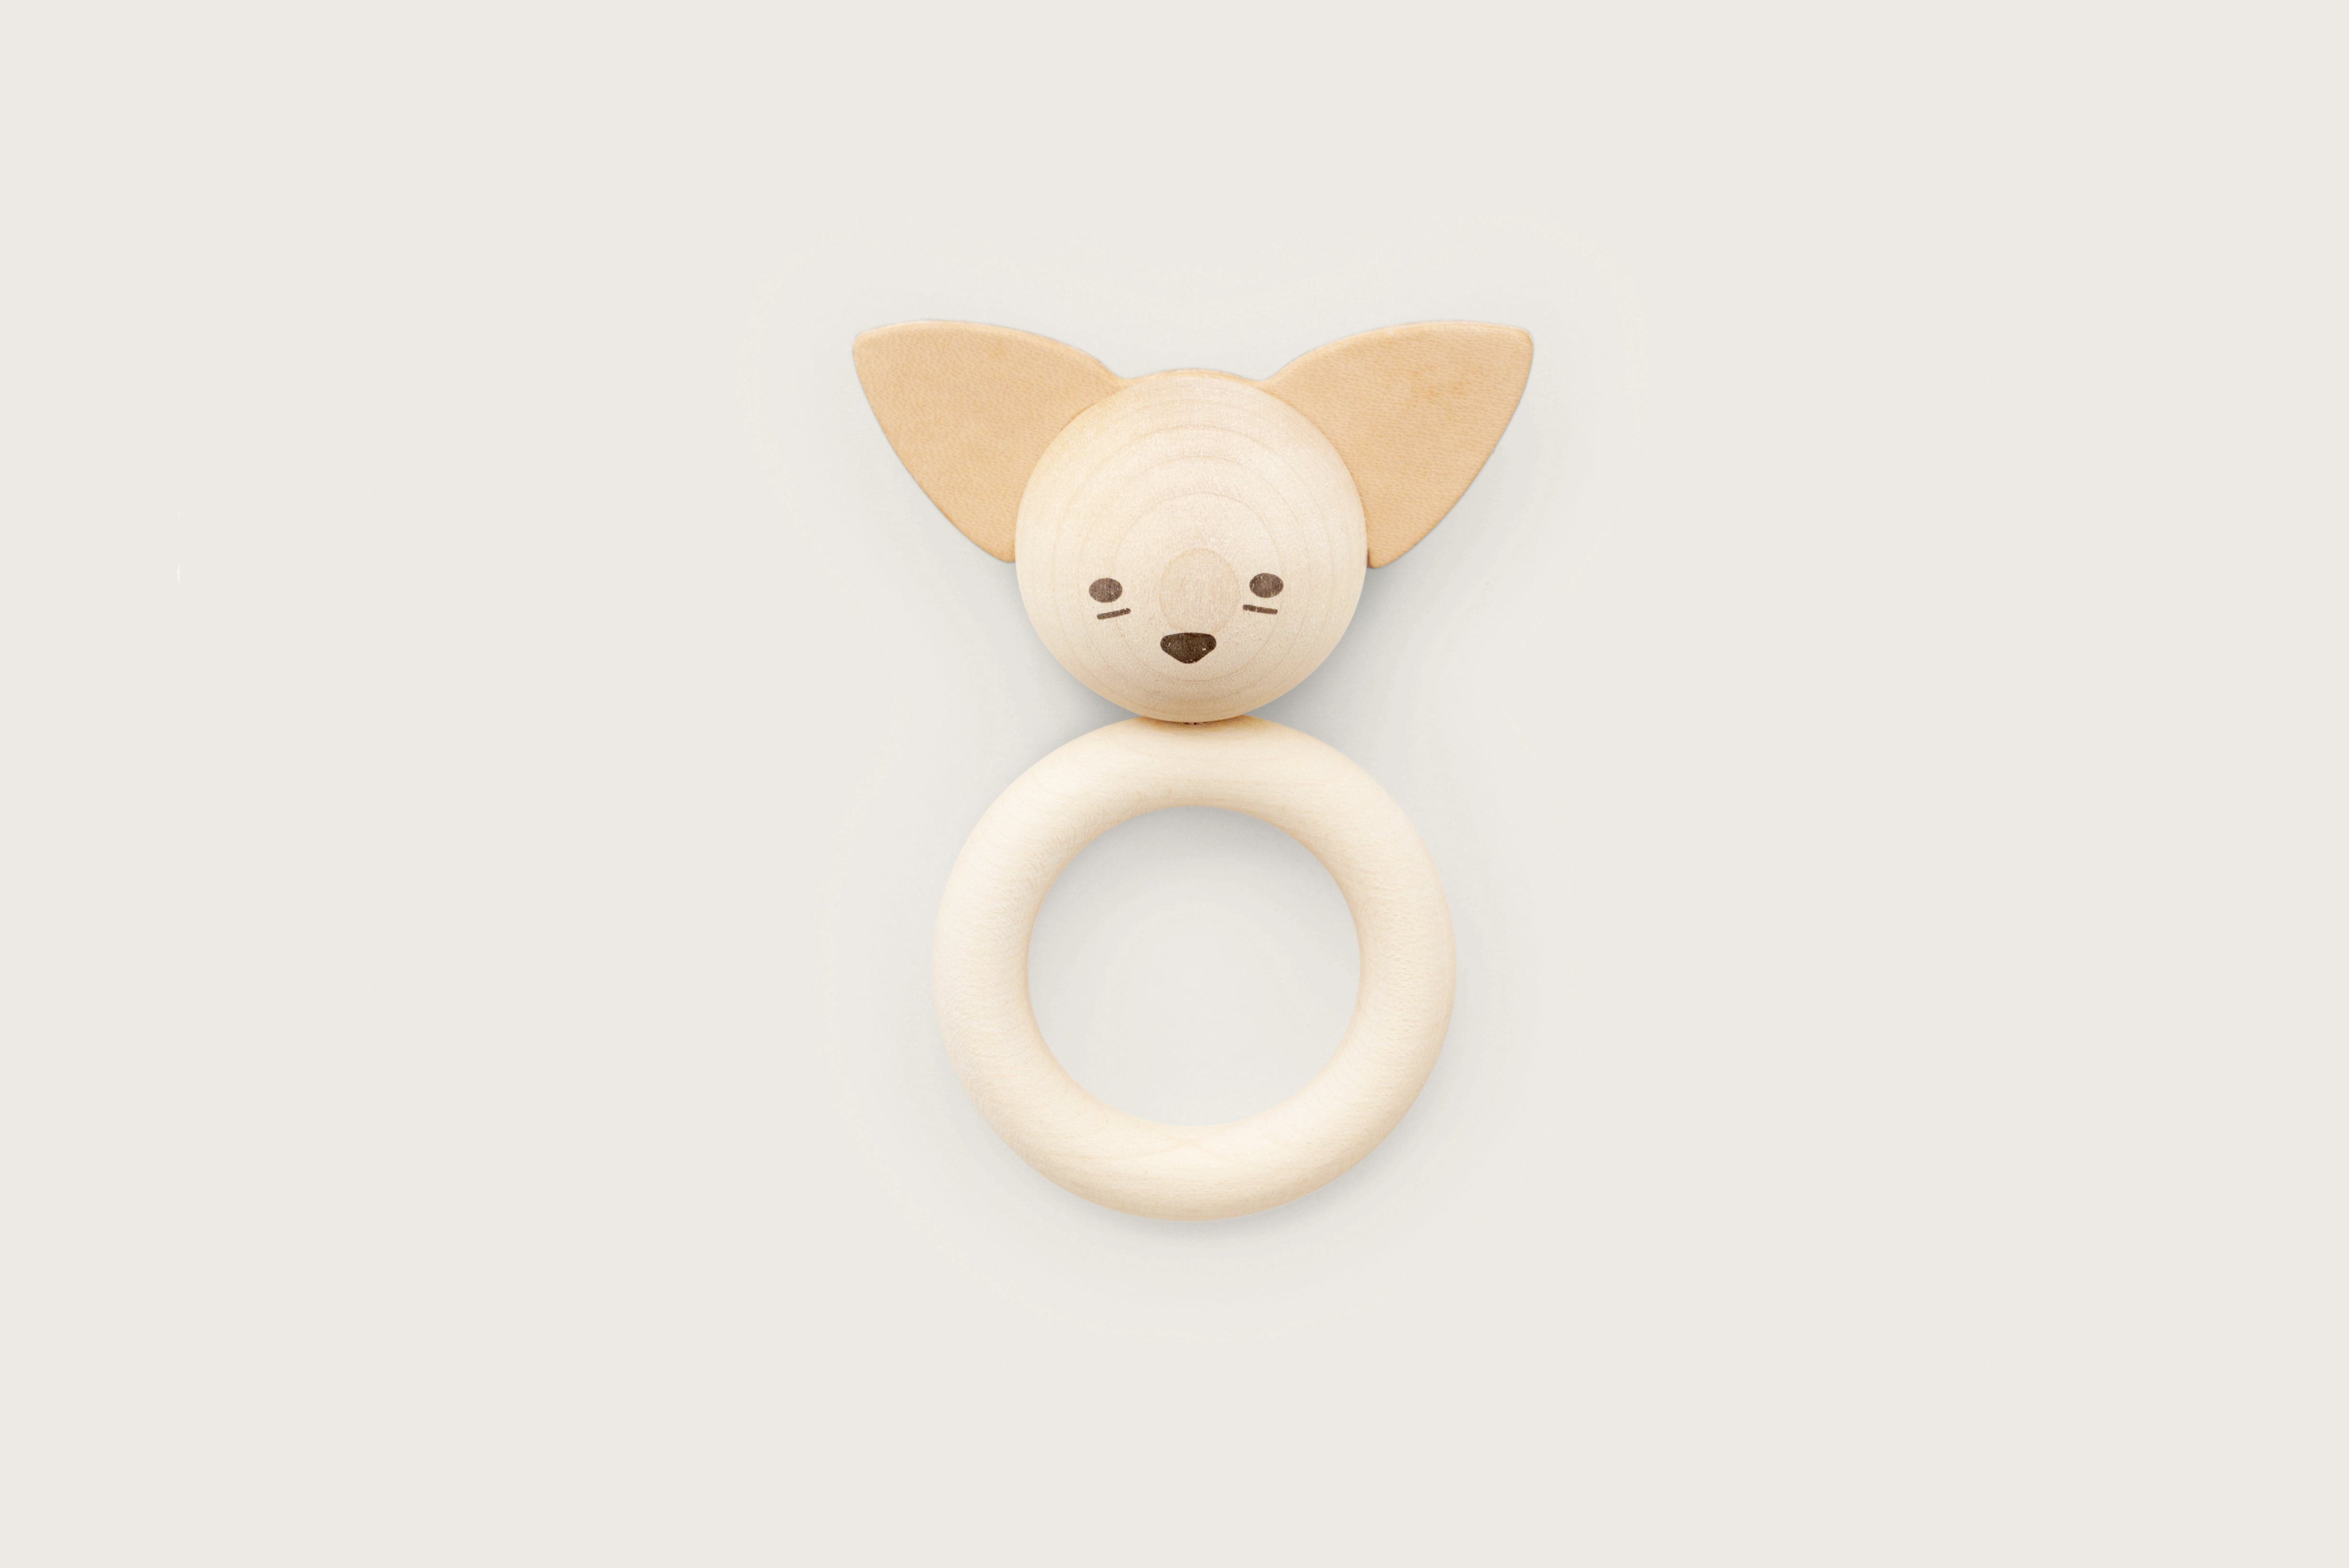 Fox teething ring made of natural wood and leather. Wooden Teeth Soother with leather